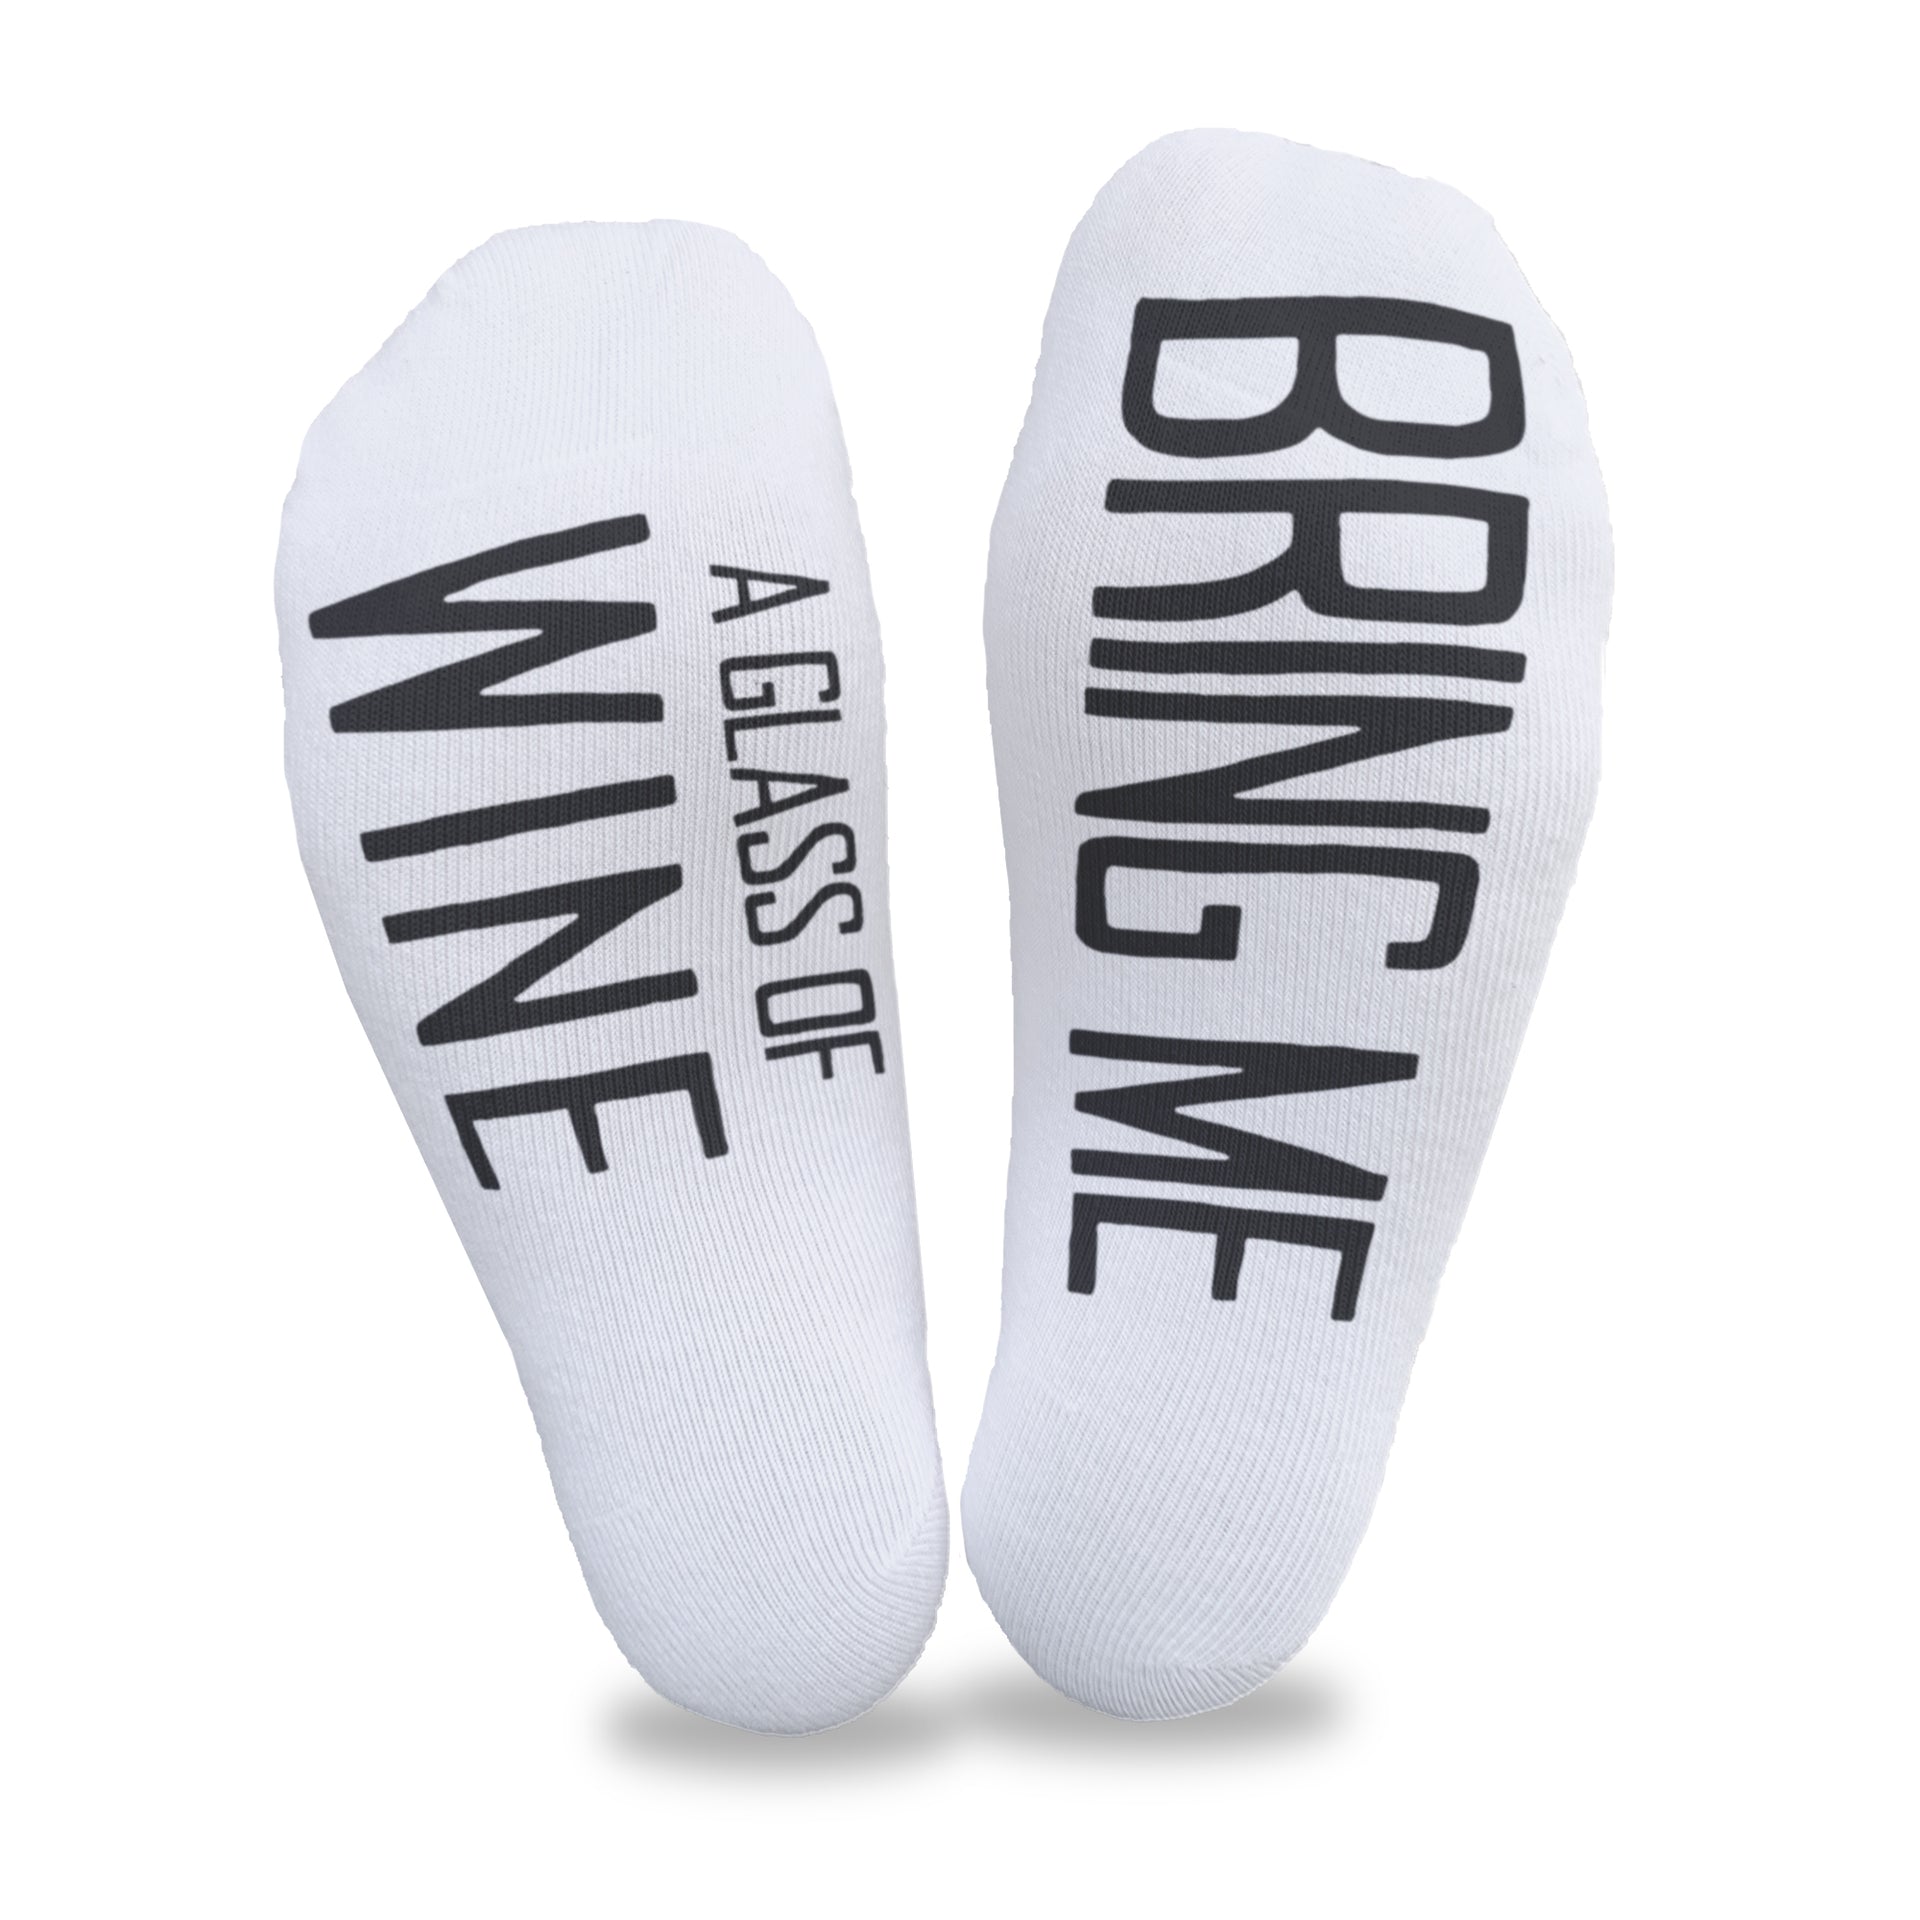 Bring me a glass of wine custom printed on the bottom soles of white cotton no show socks make a fun night in with your spouse.